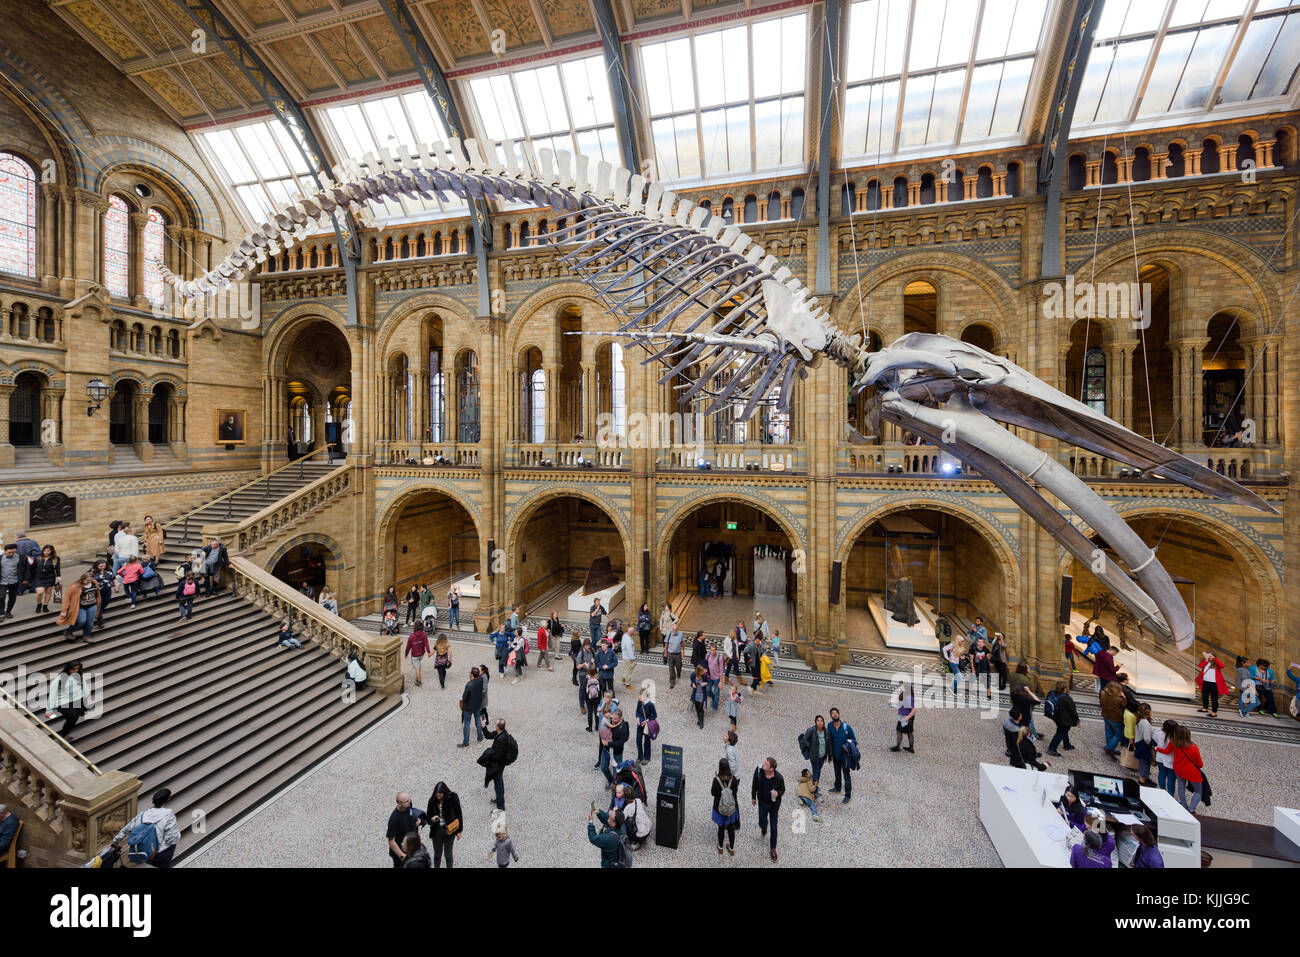 LONDON, ENGLAND - 16 SEPTEMBER 2017: Visitors flock in the newly  reimagined Hintze Hall of the Natural History Museum, London, England. The upper gal Stock Photo